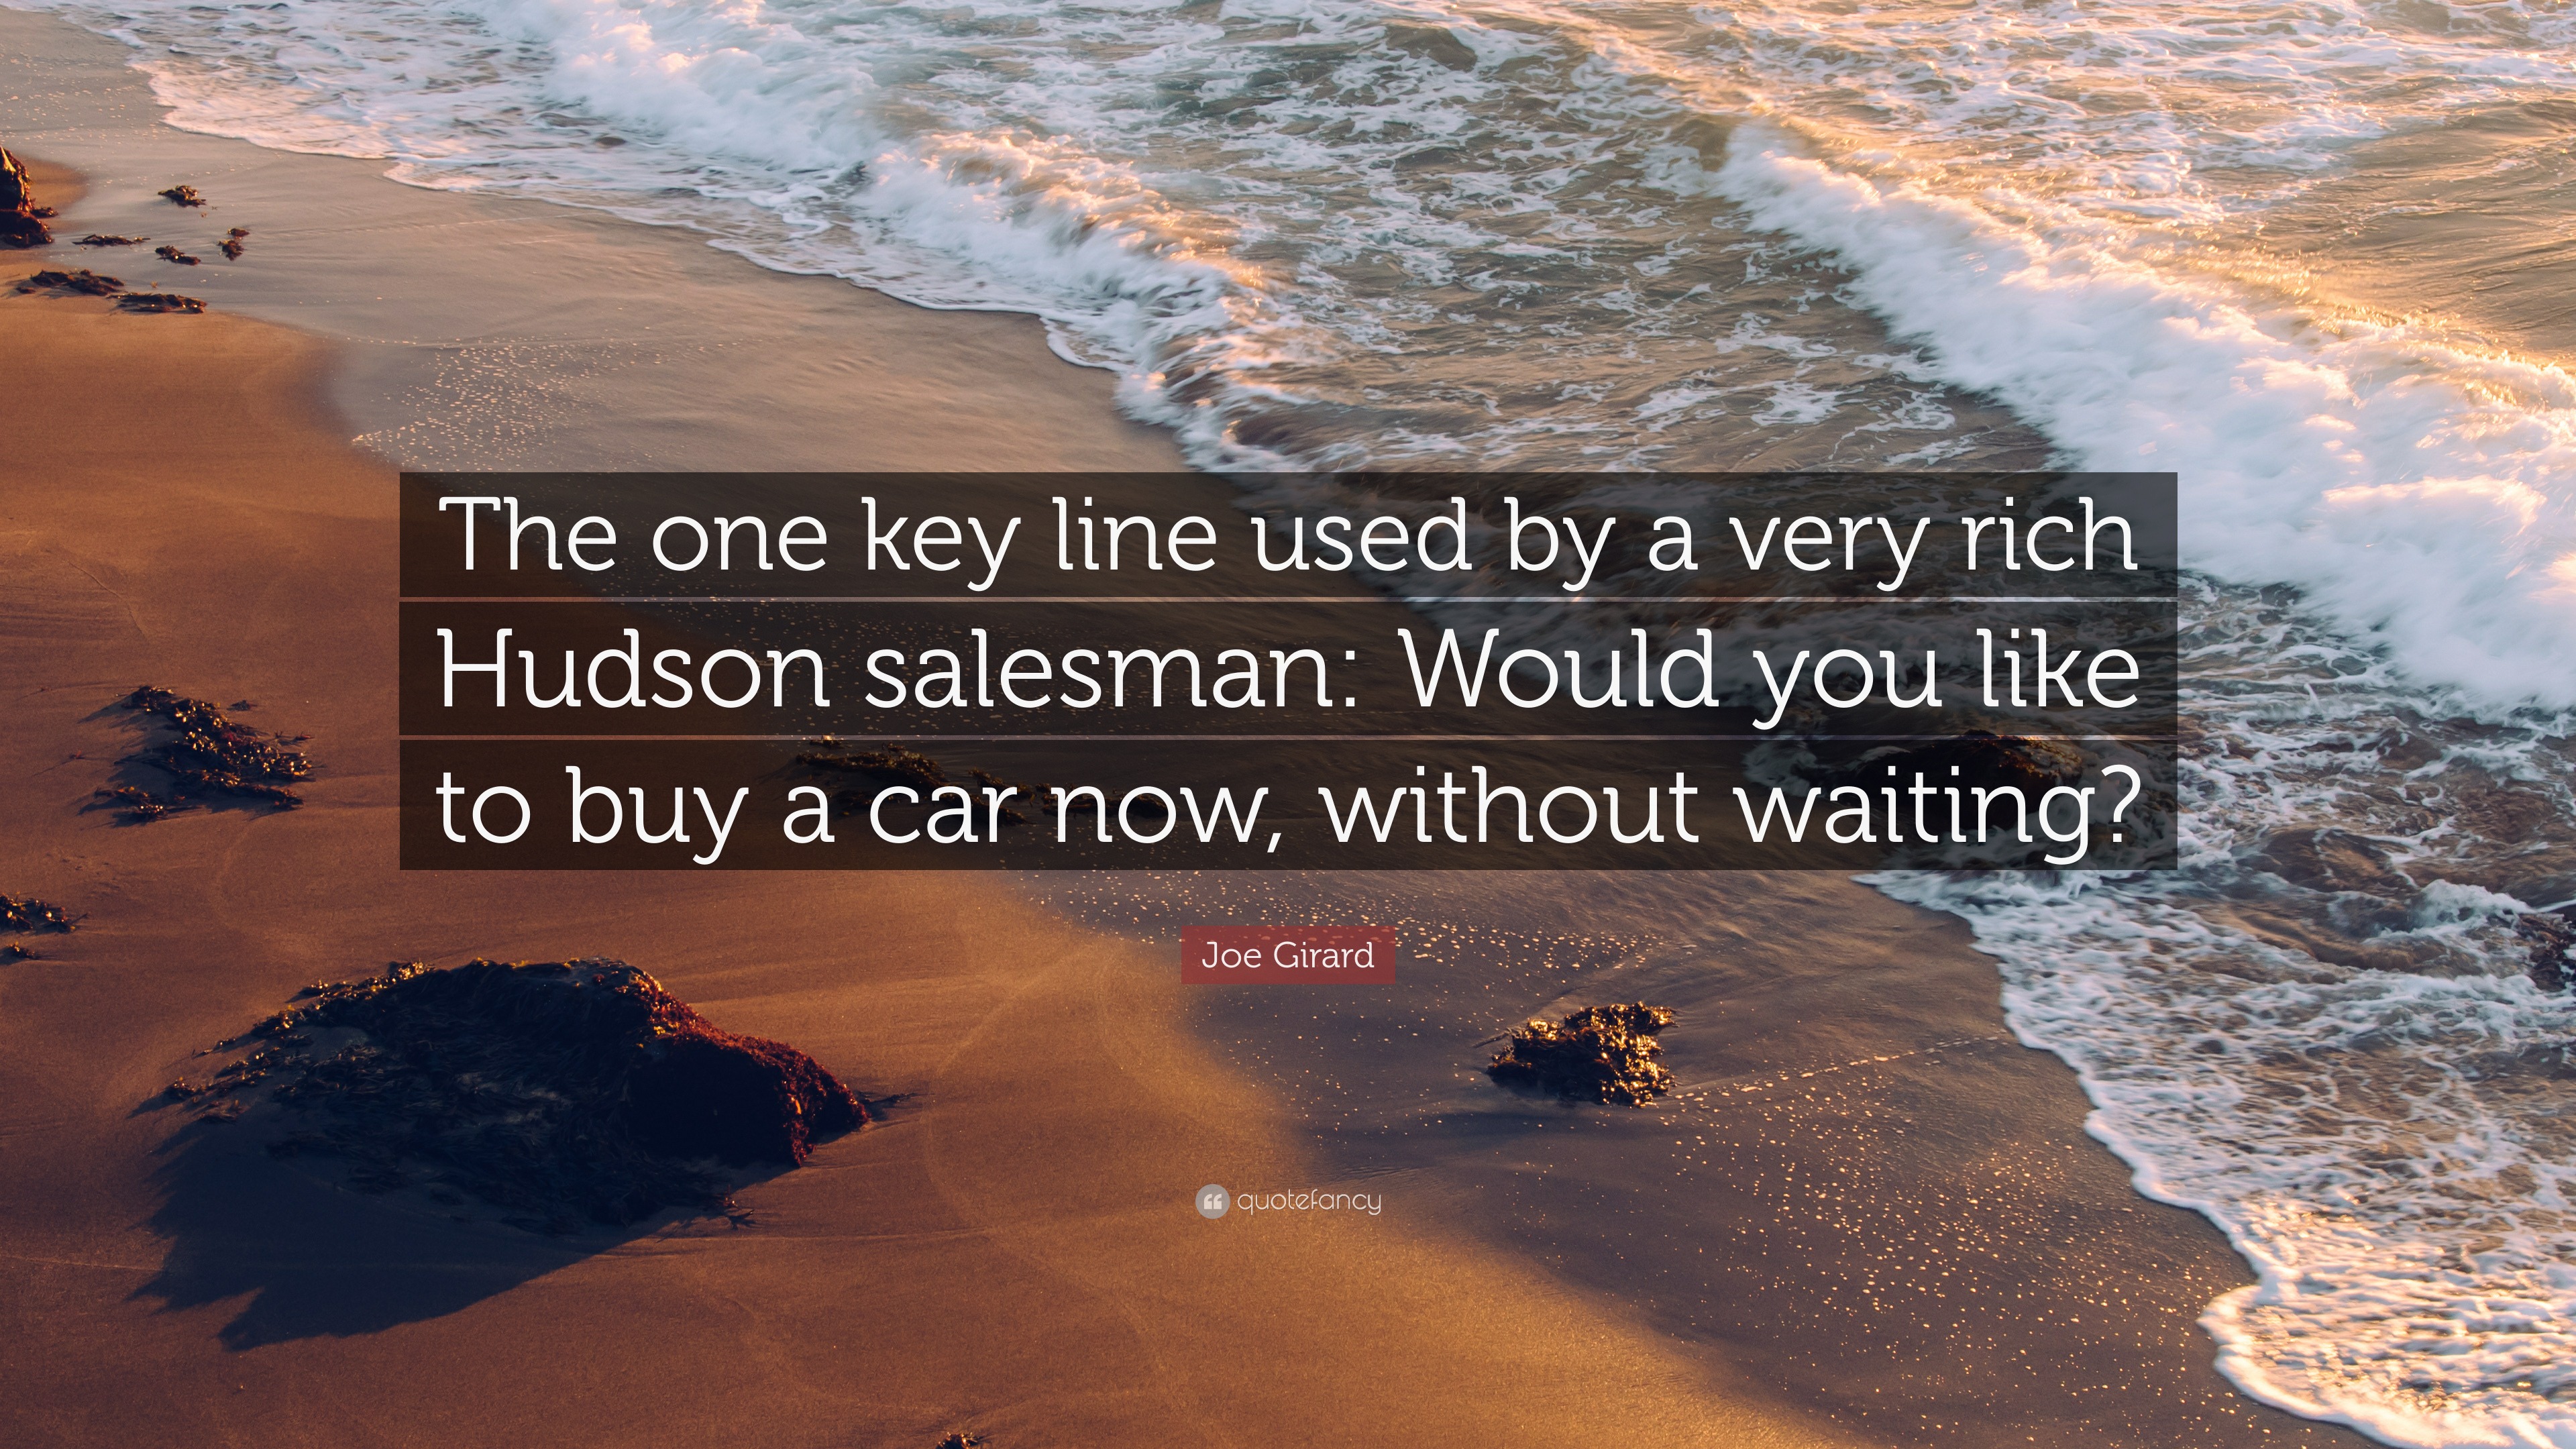 Joe Girard Quote: “The one key line used by a very rich Hudson salesman ...